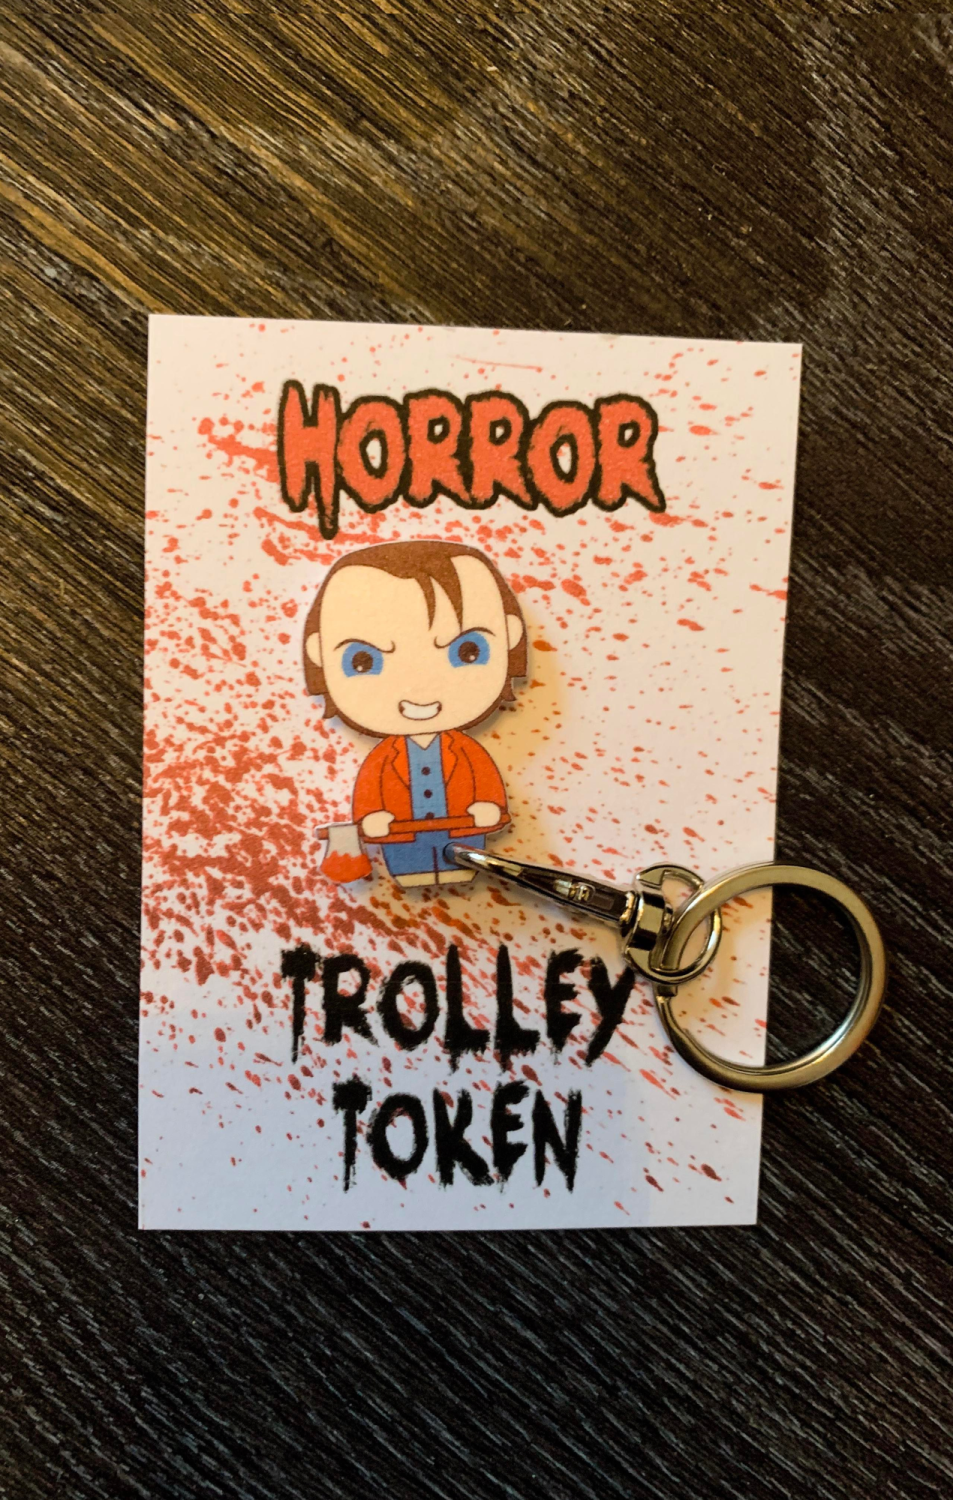 Jack Torrence Trolley Token - The Shining